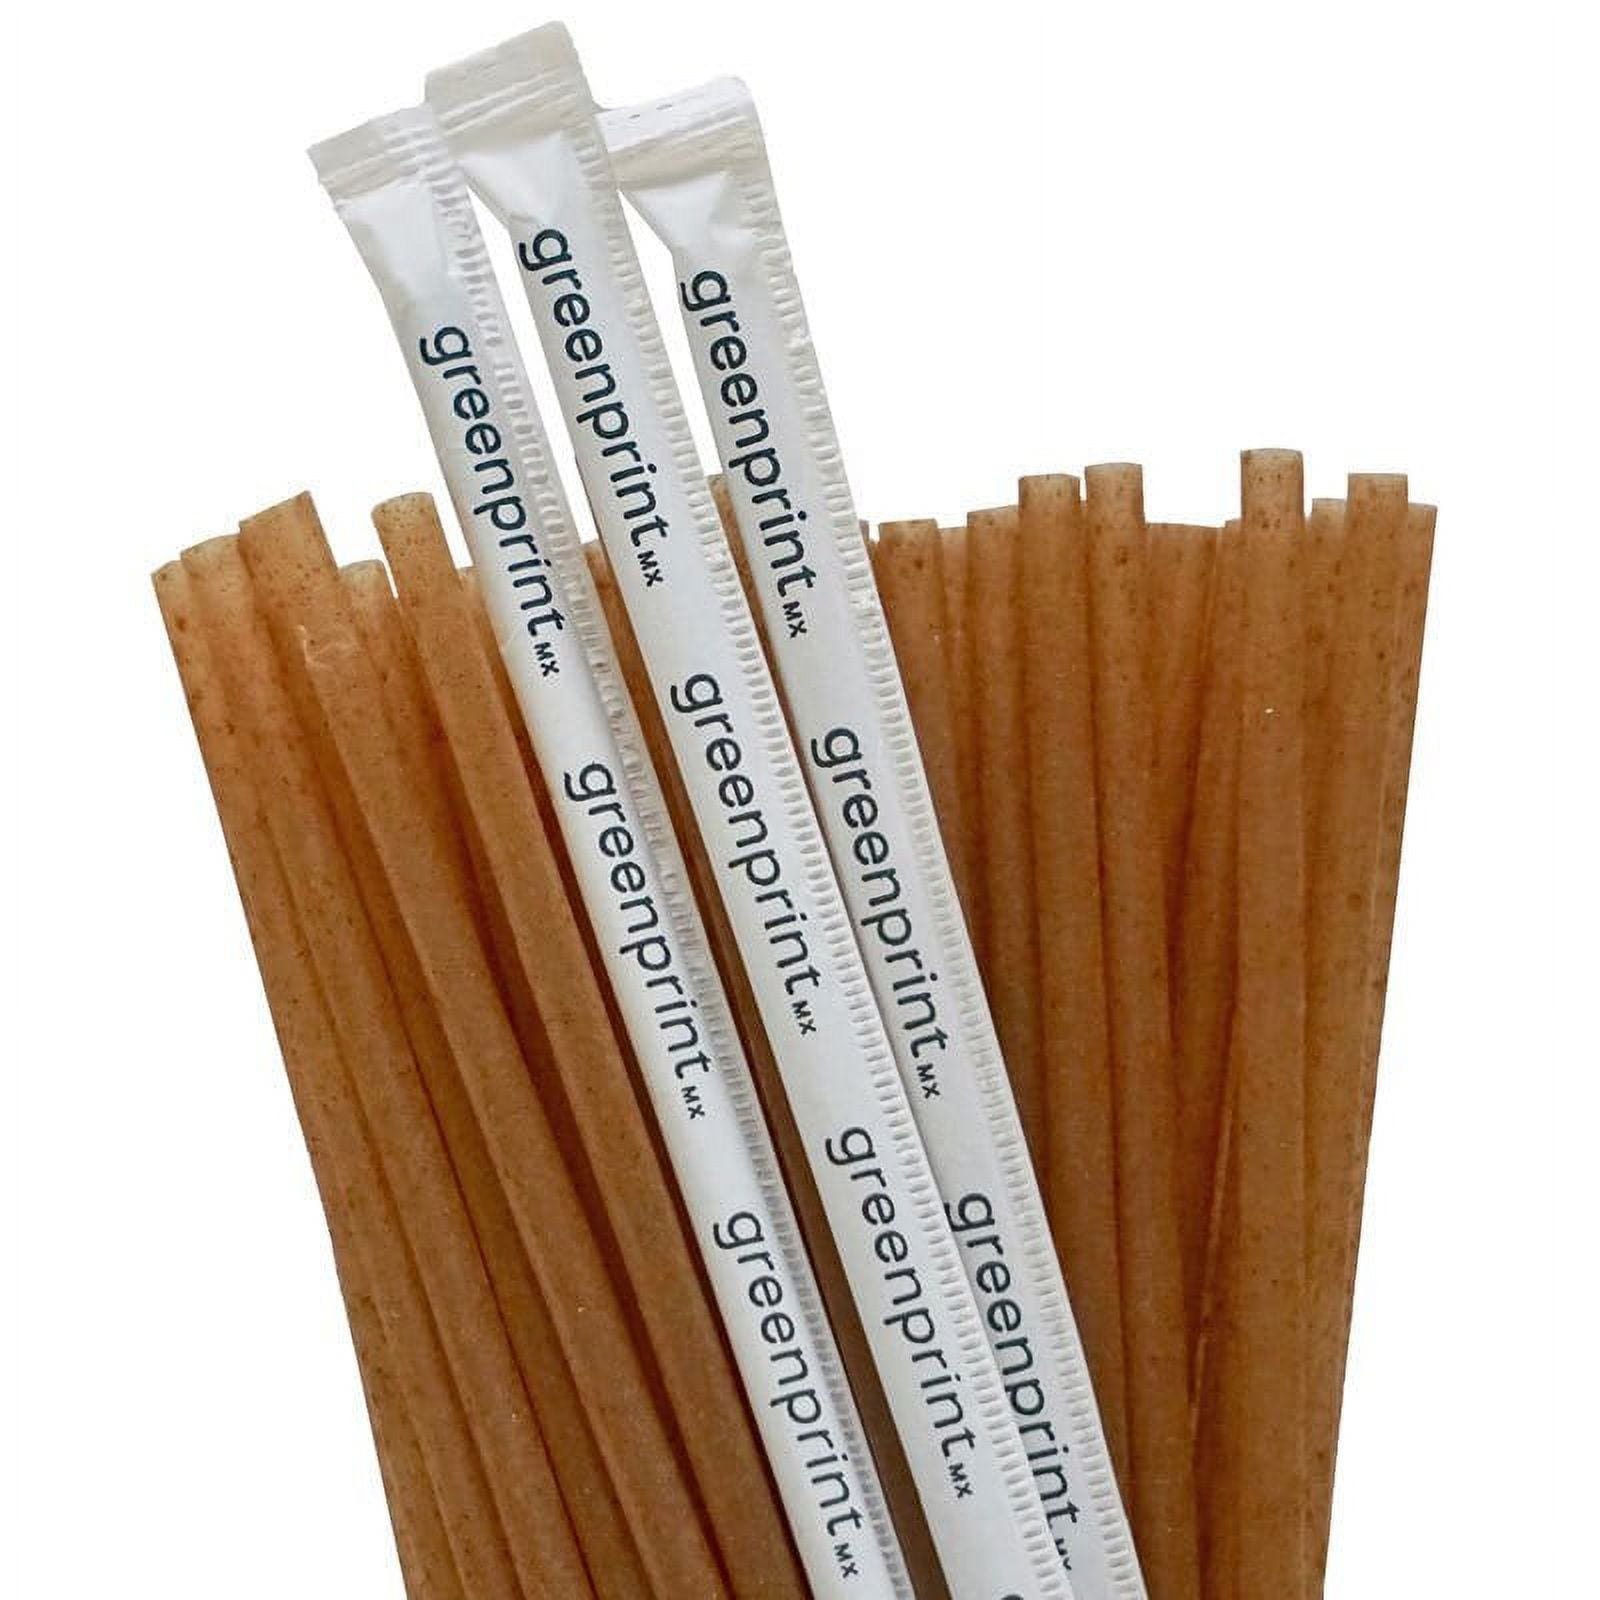 Odash Rcl-4531 Reusable Straws for Cold & Hot Drinks for 32 oz Cups - Set of 4